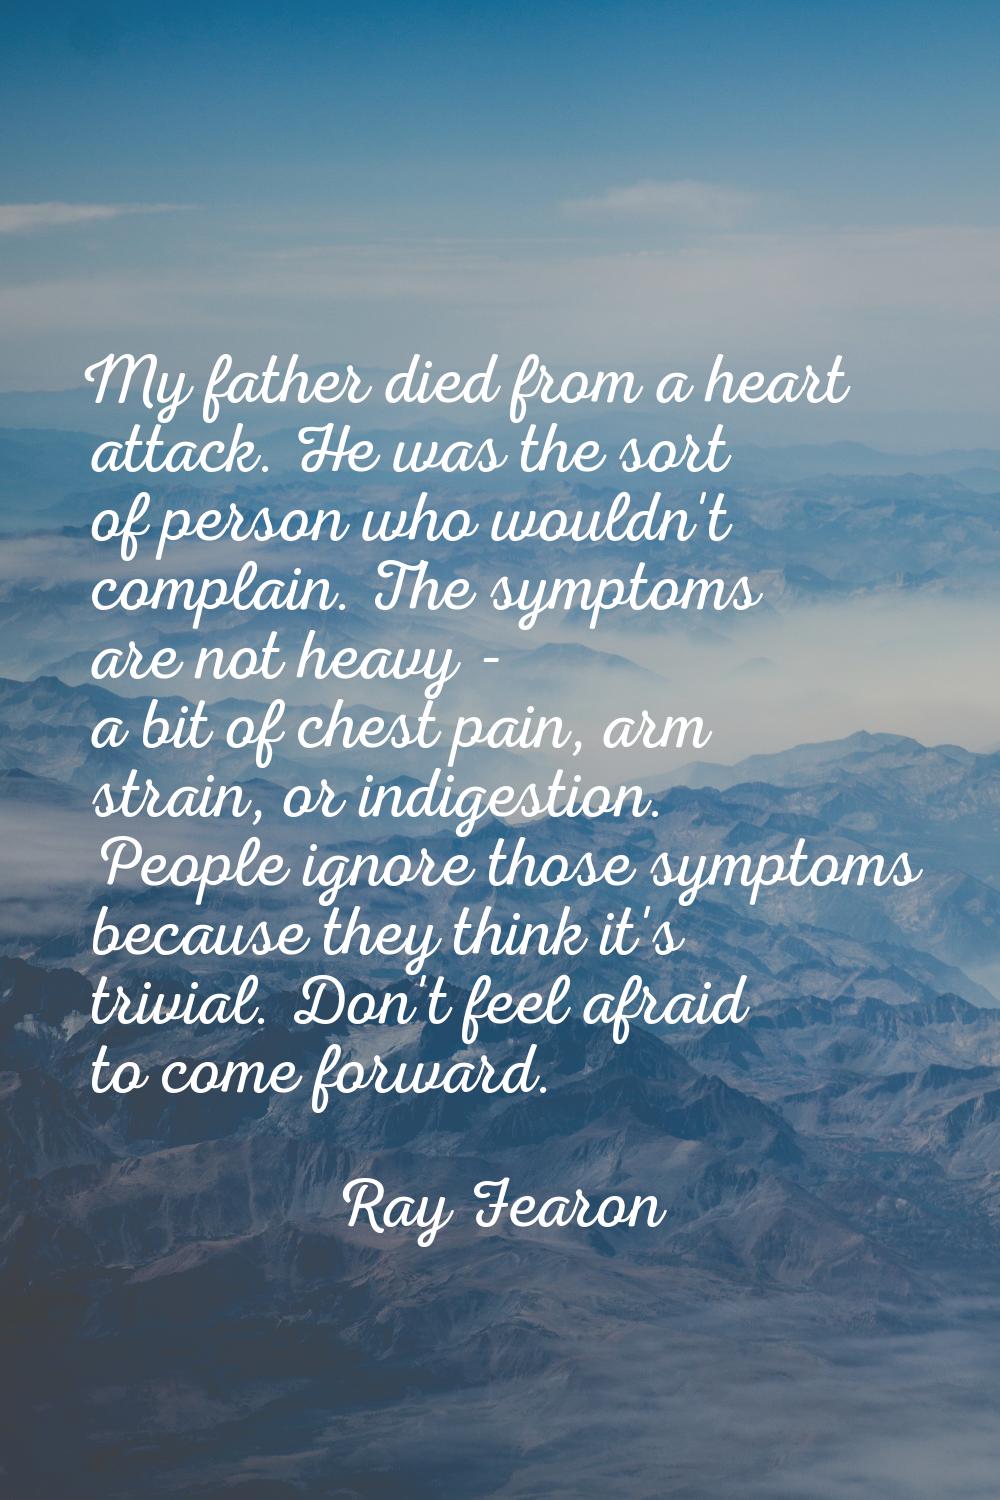 My father died from a heart attack. He was the sort of person who wouldn't complain. The symptoms a